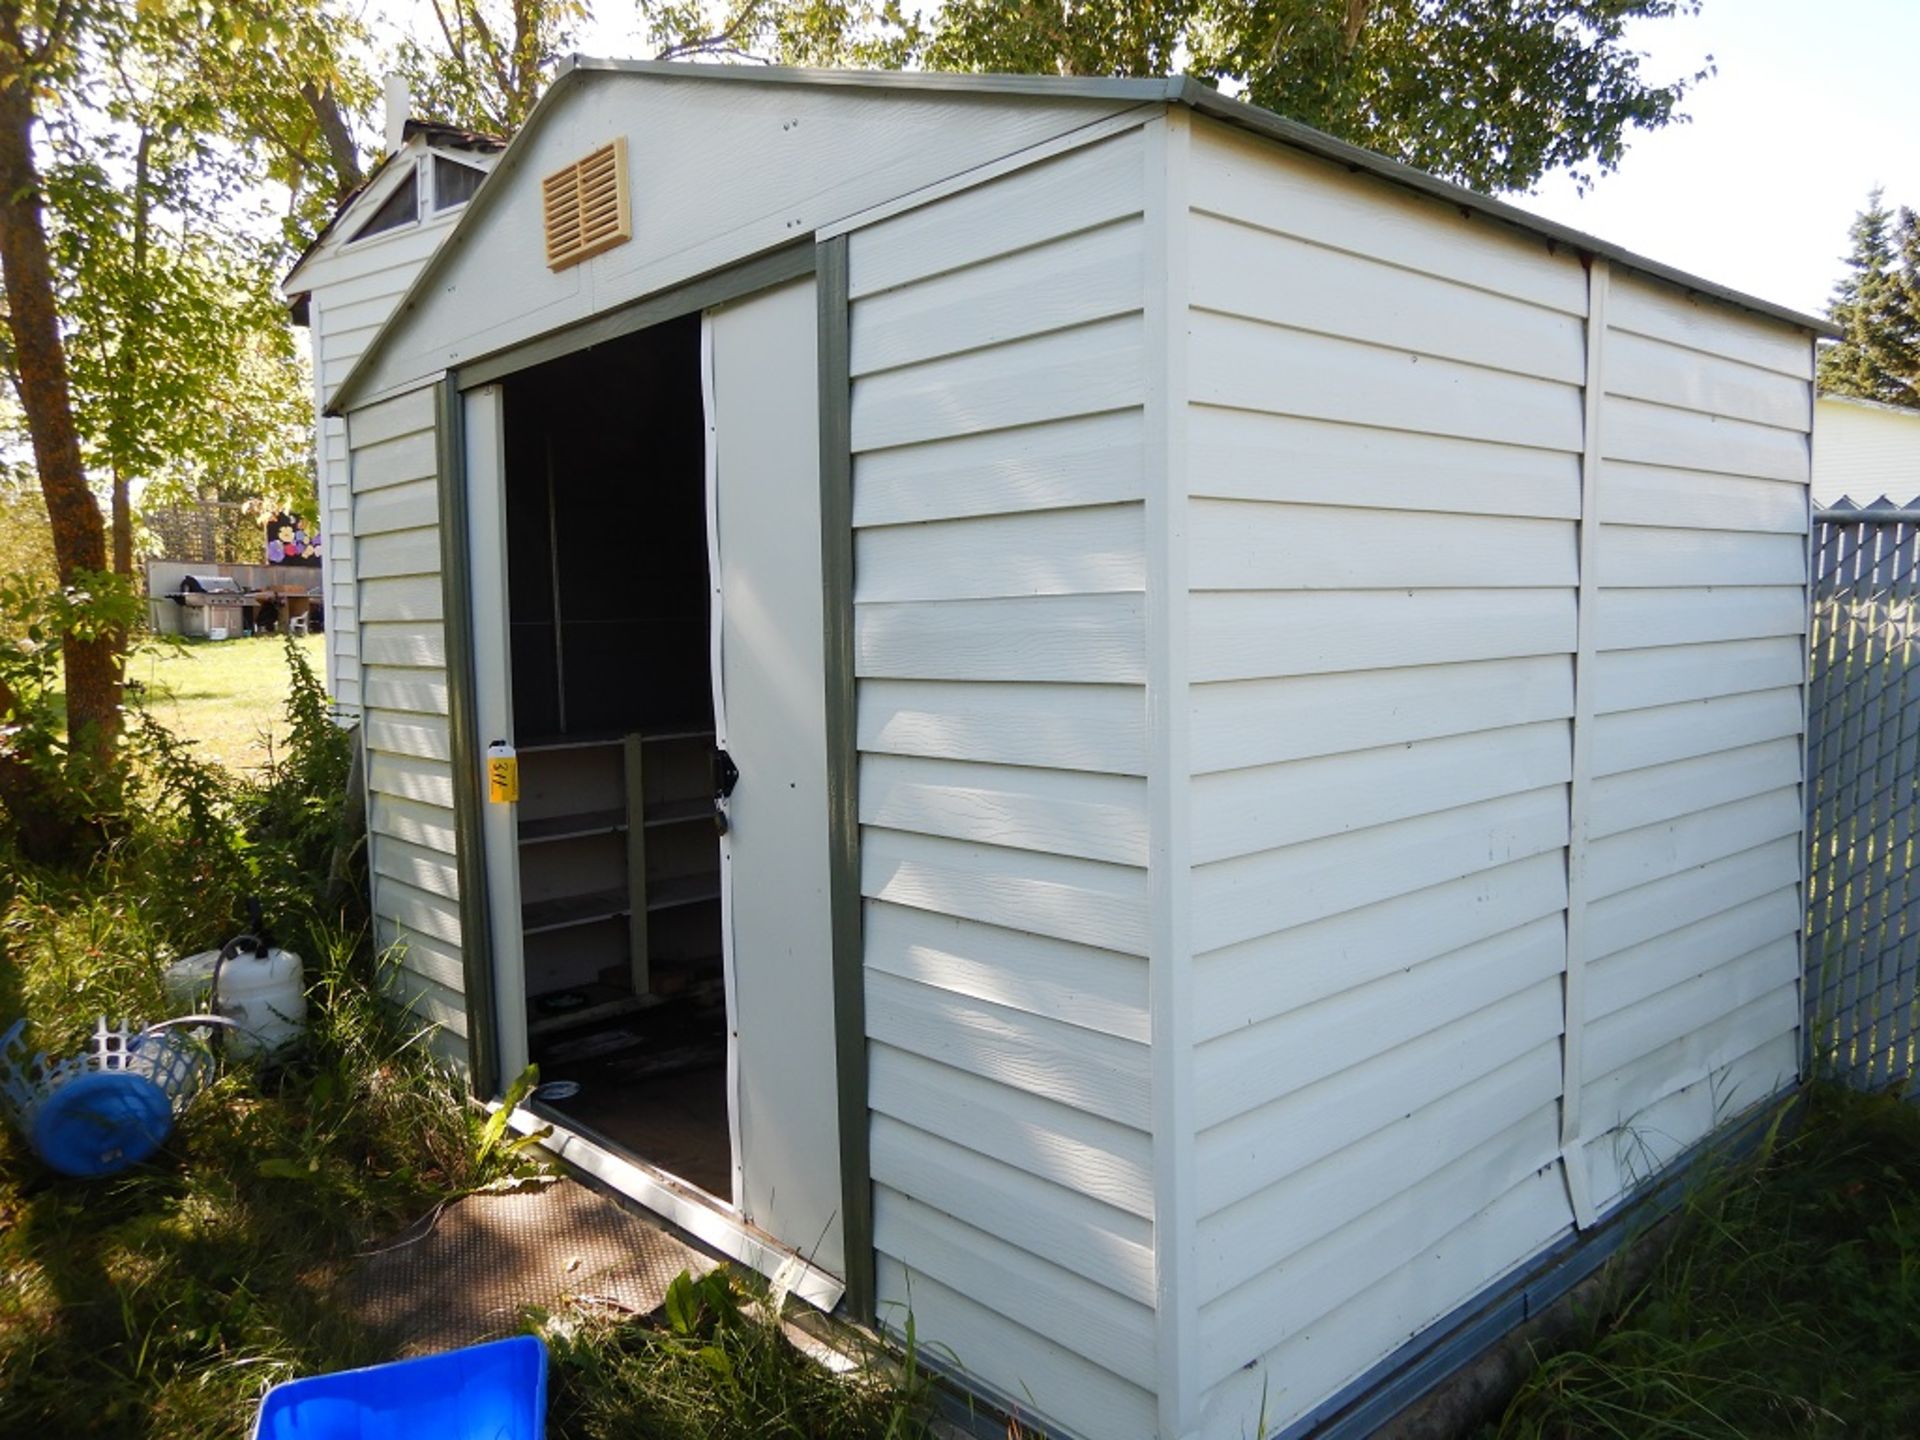 8'X10' METAL GARDEN SHED - Image 3 of 3